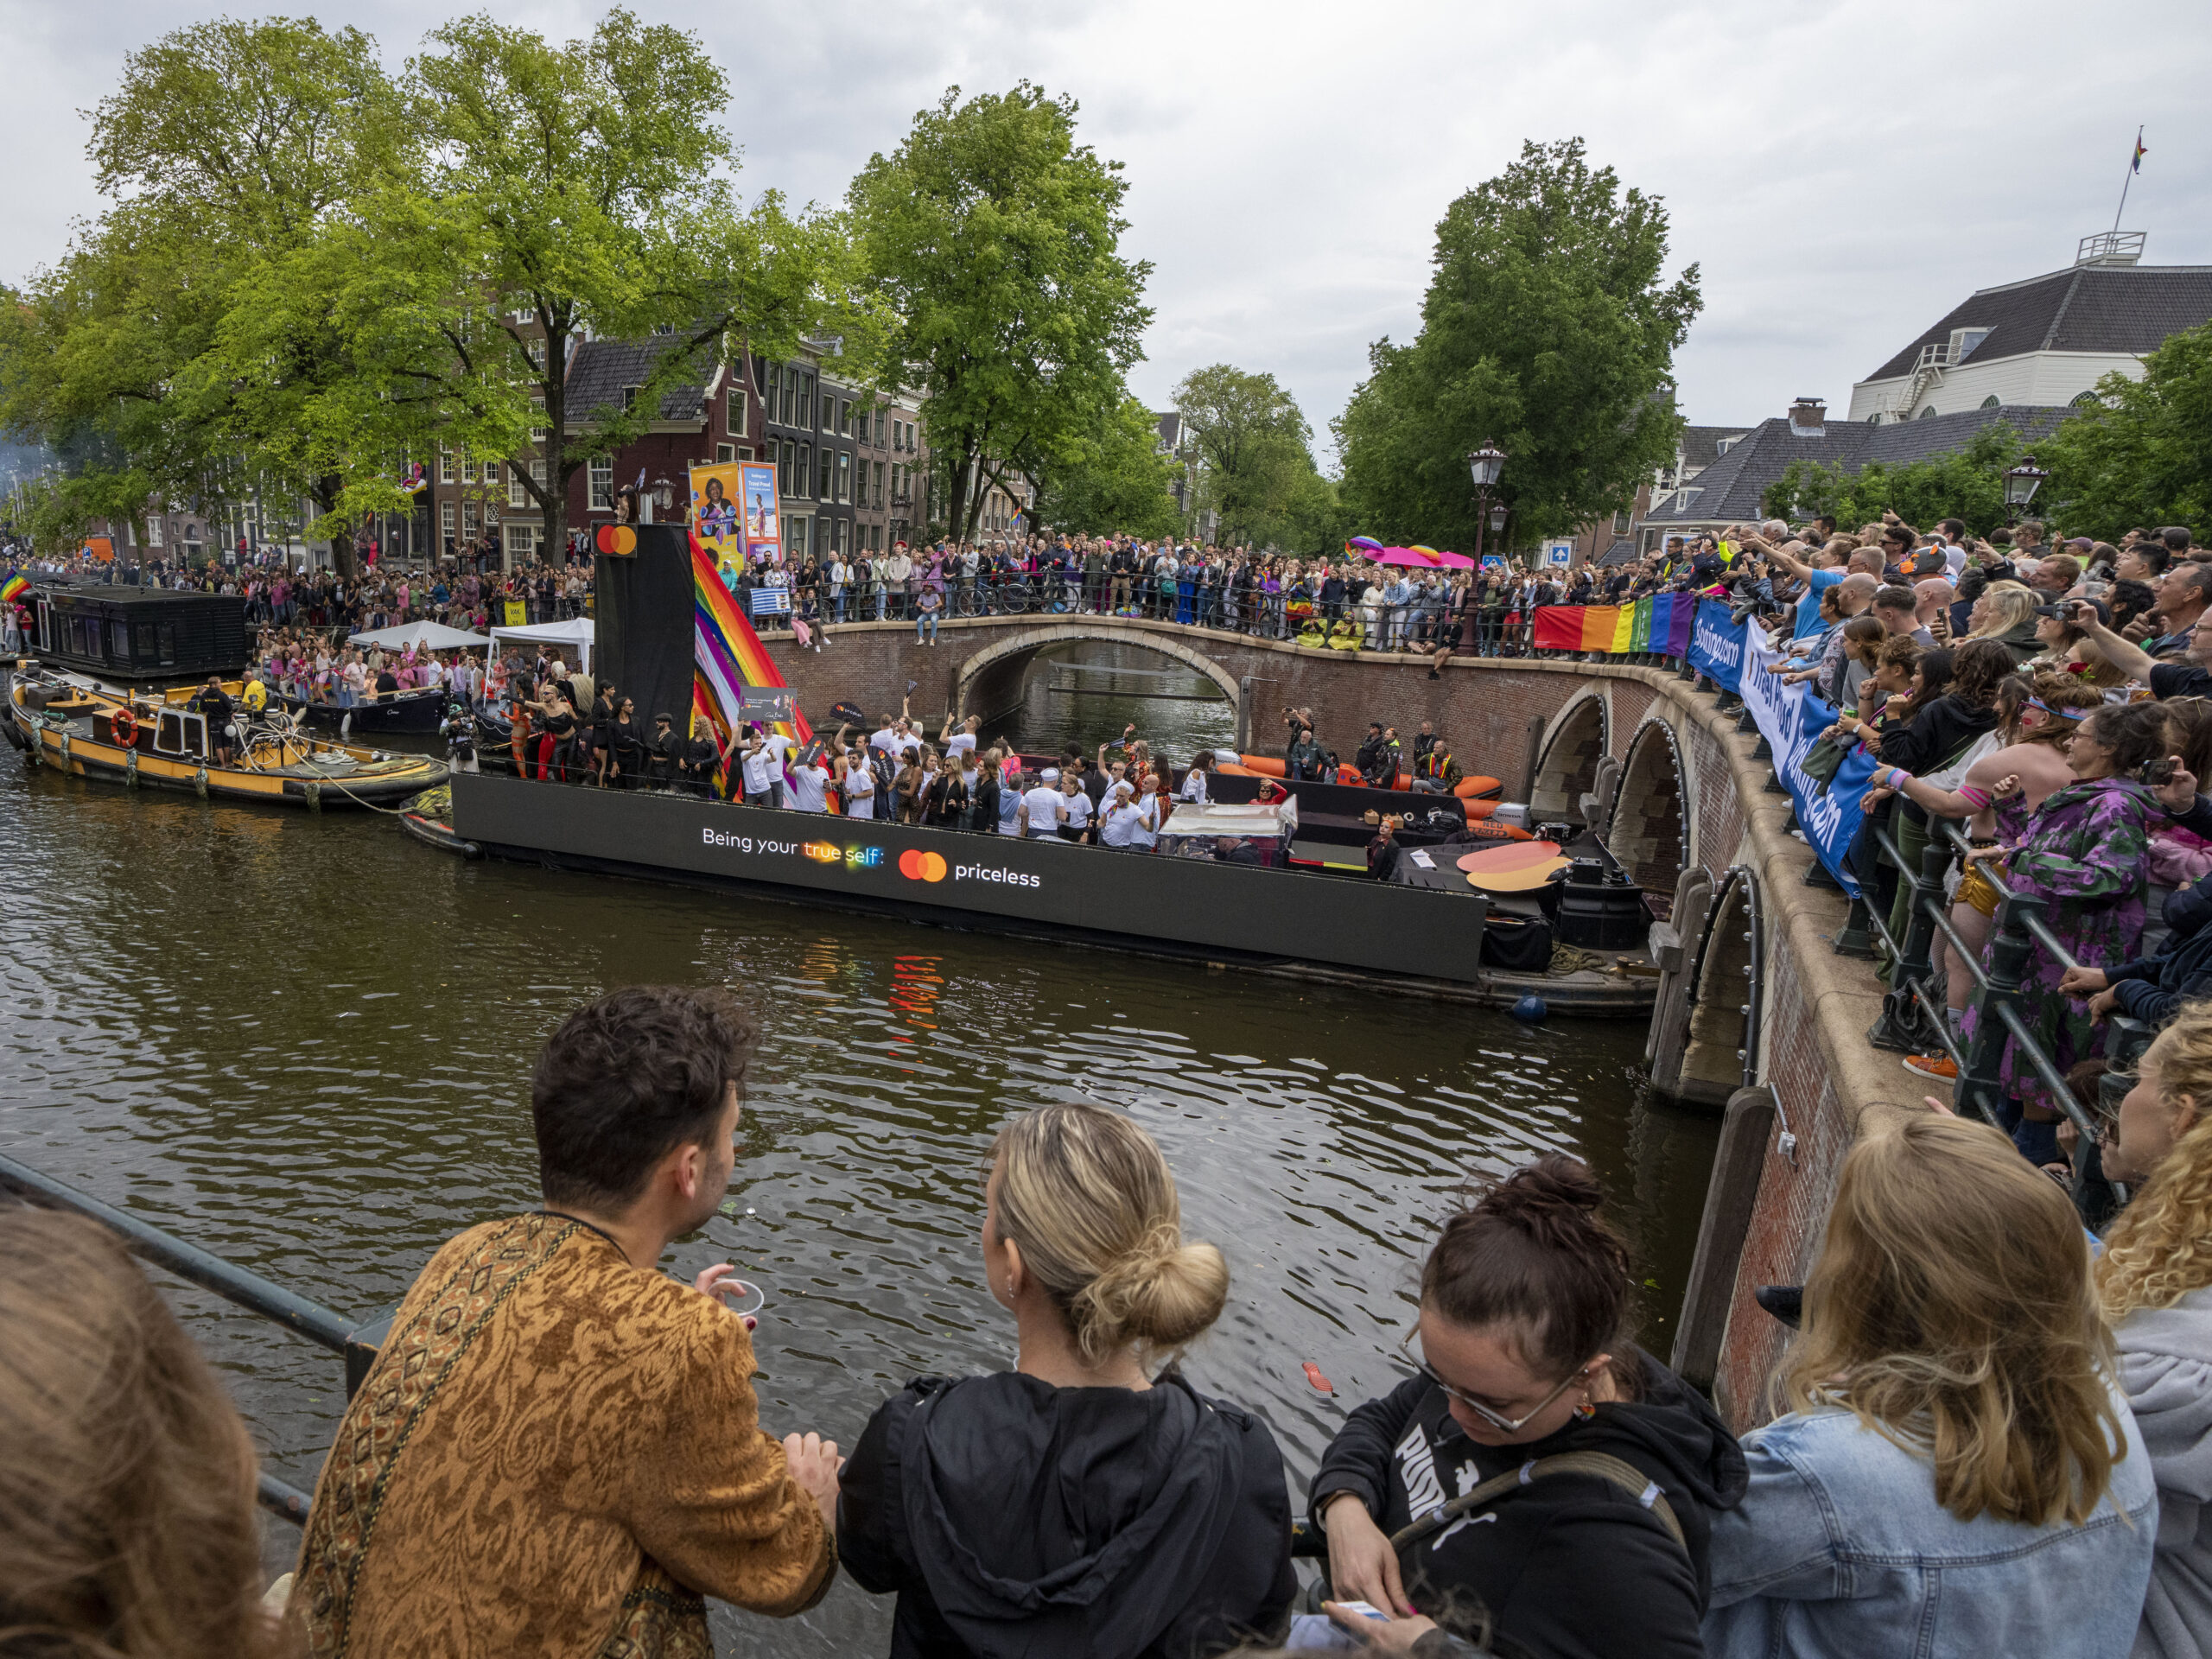 Amsterdam was flooded with tourists in 2023, so it won’t allow any more hotels